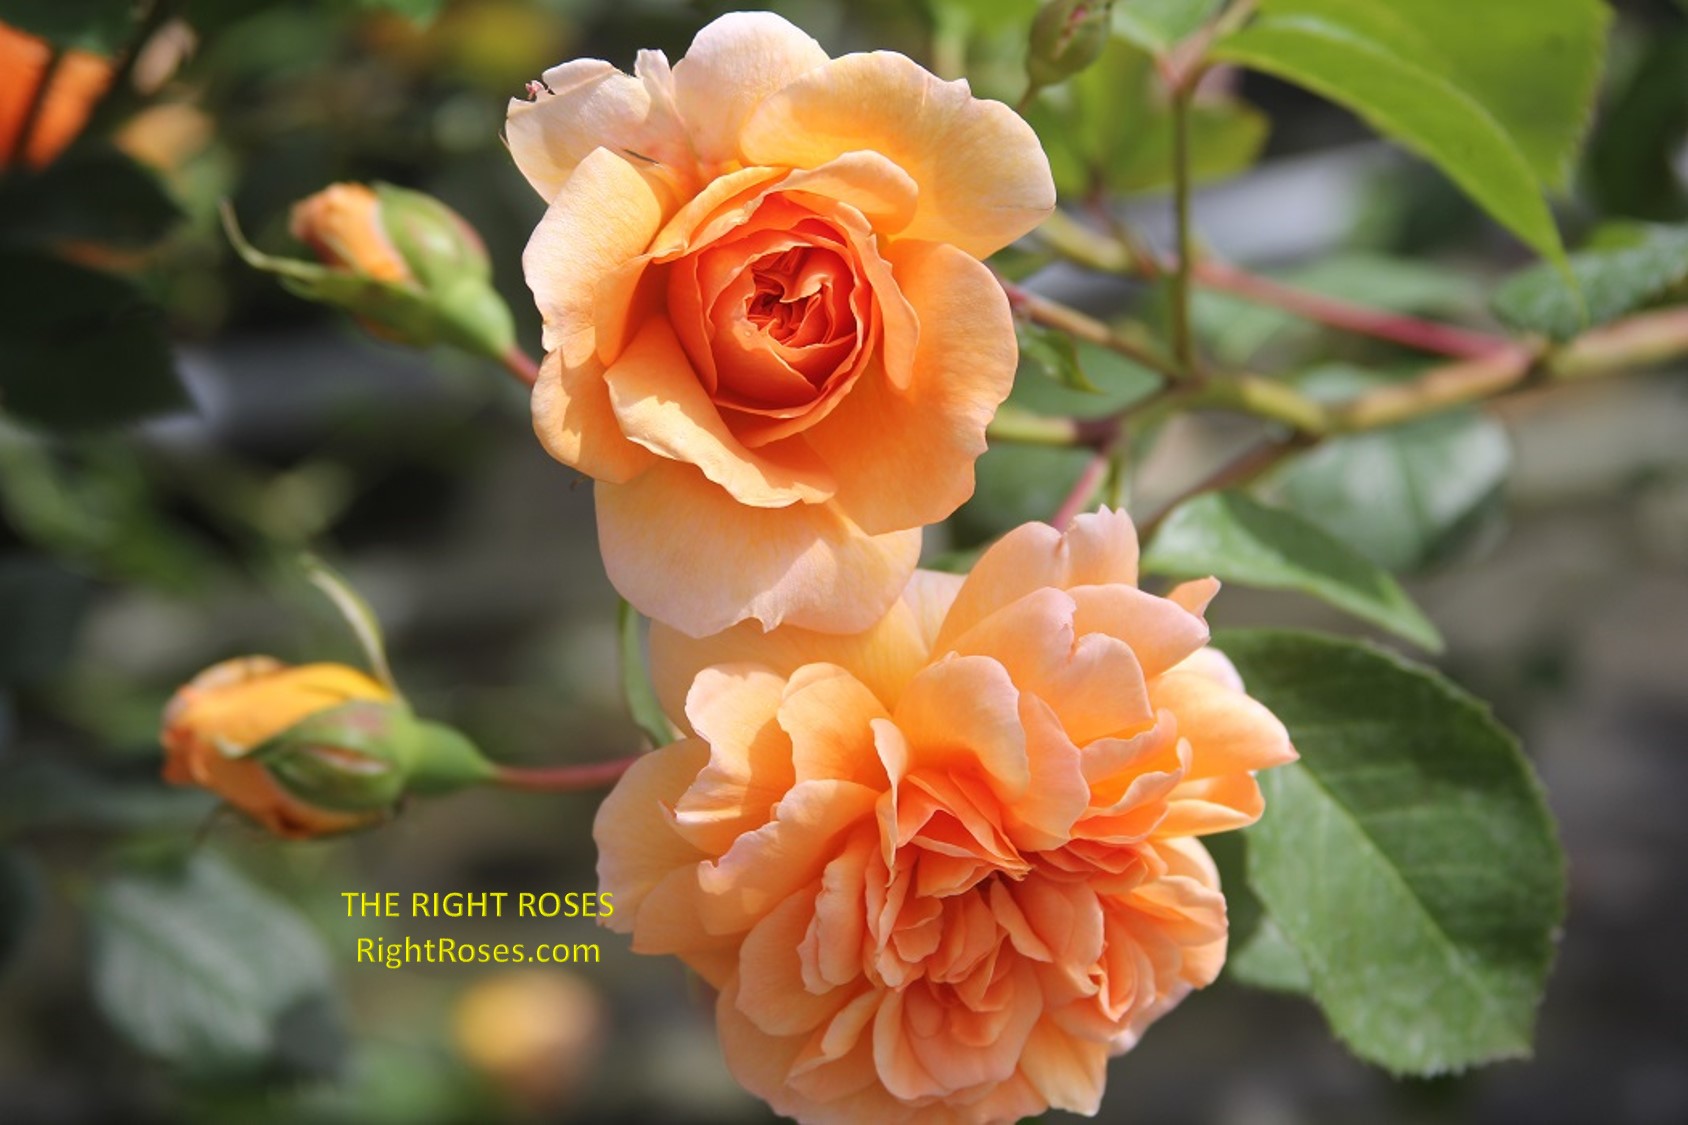 Dame Judi Dench rose review the right roses score best top garden store david austin english roses rose products rose rating the right leap rose food fertilizer